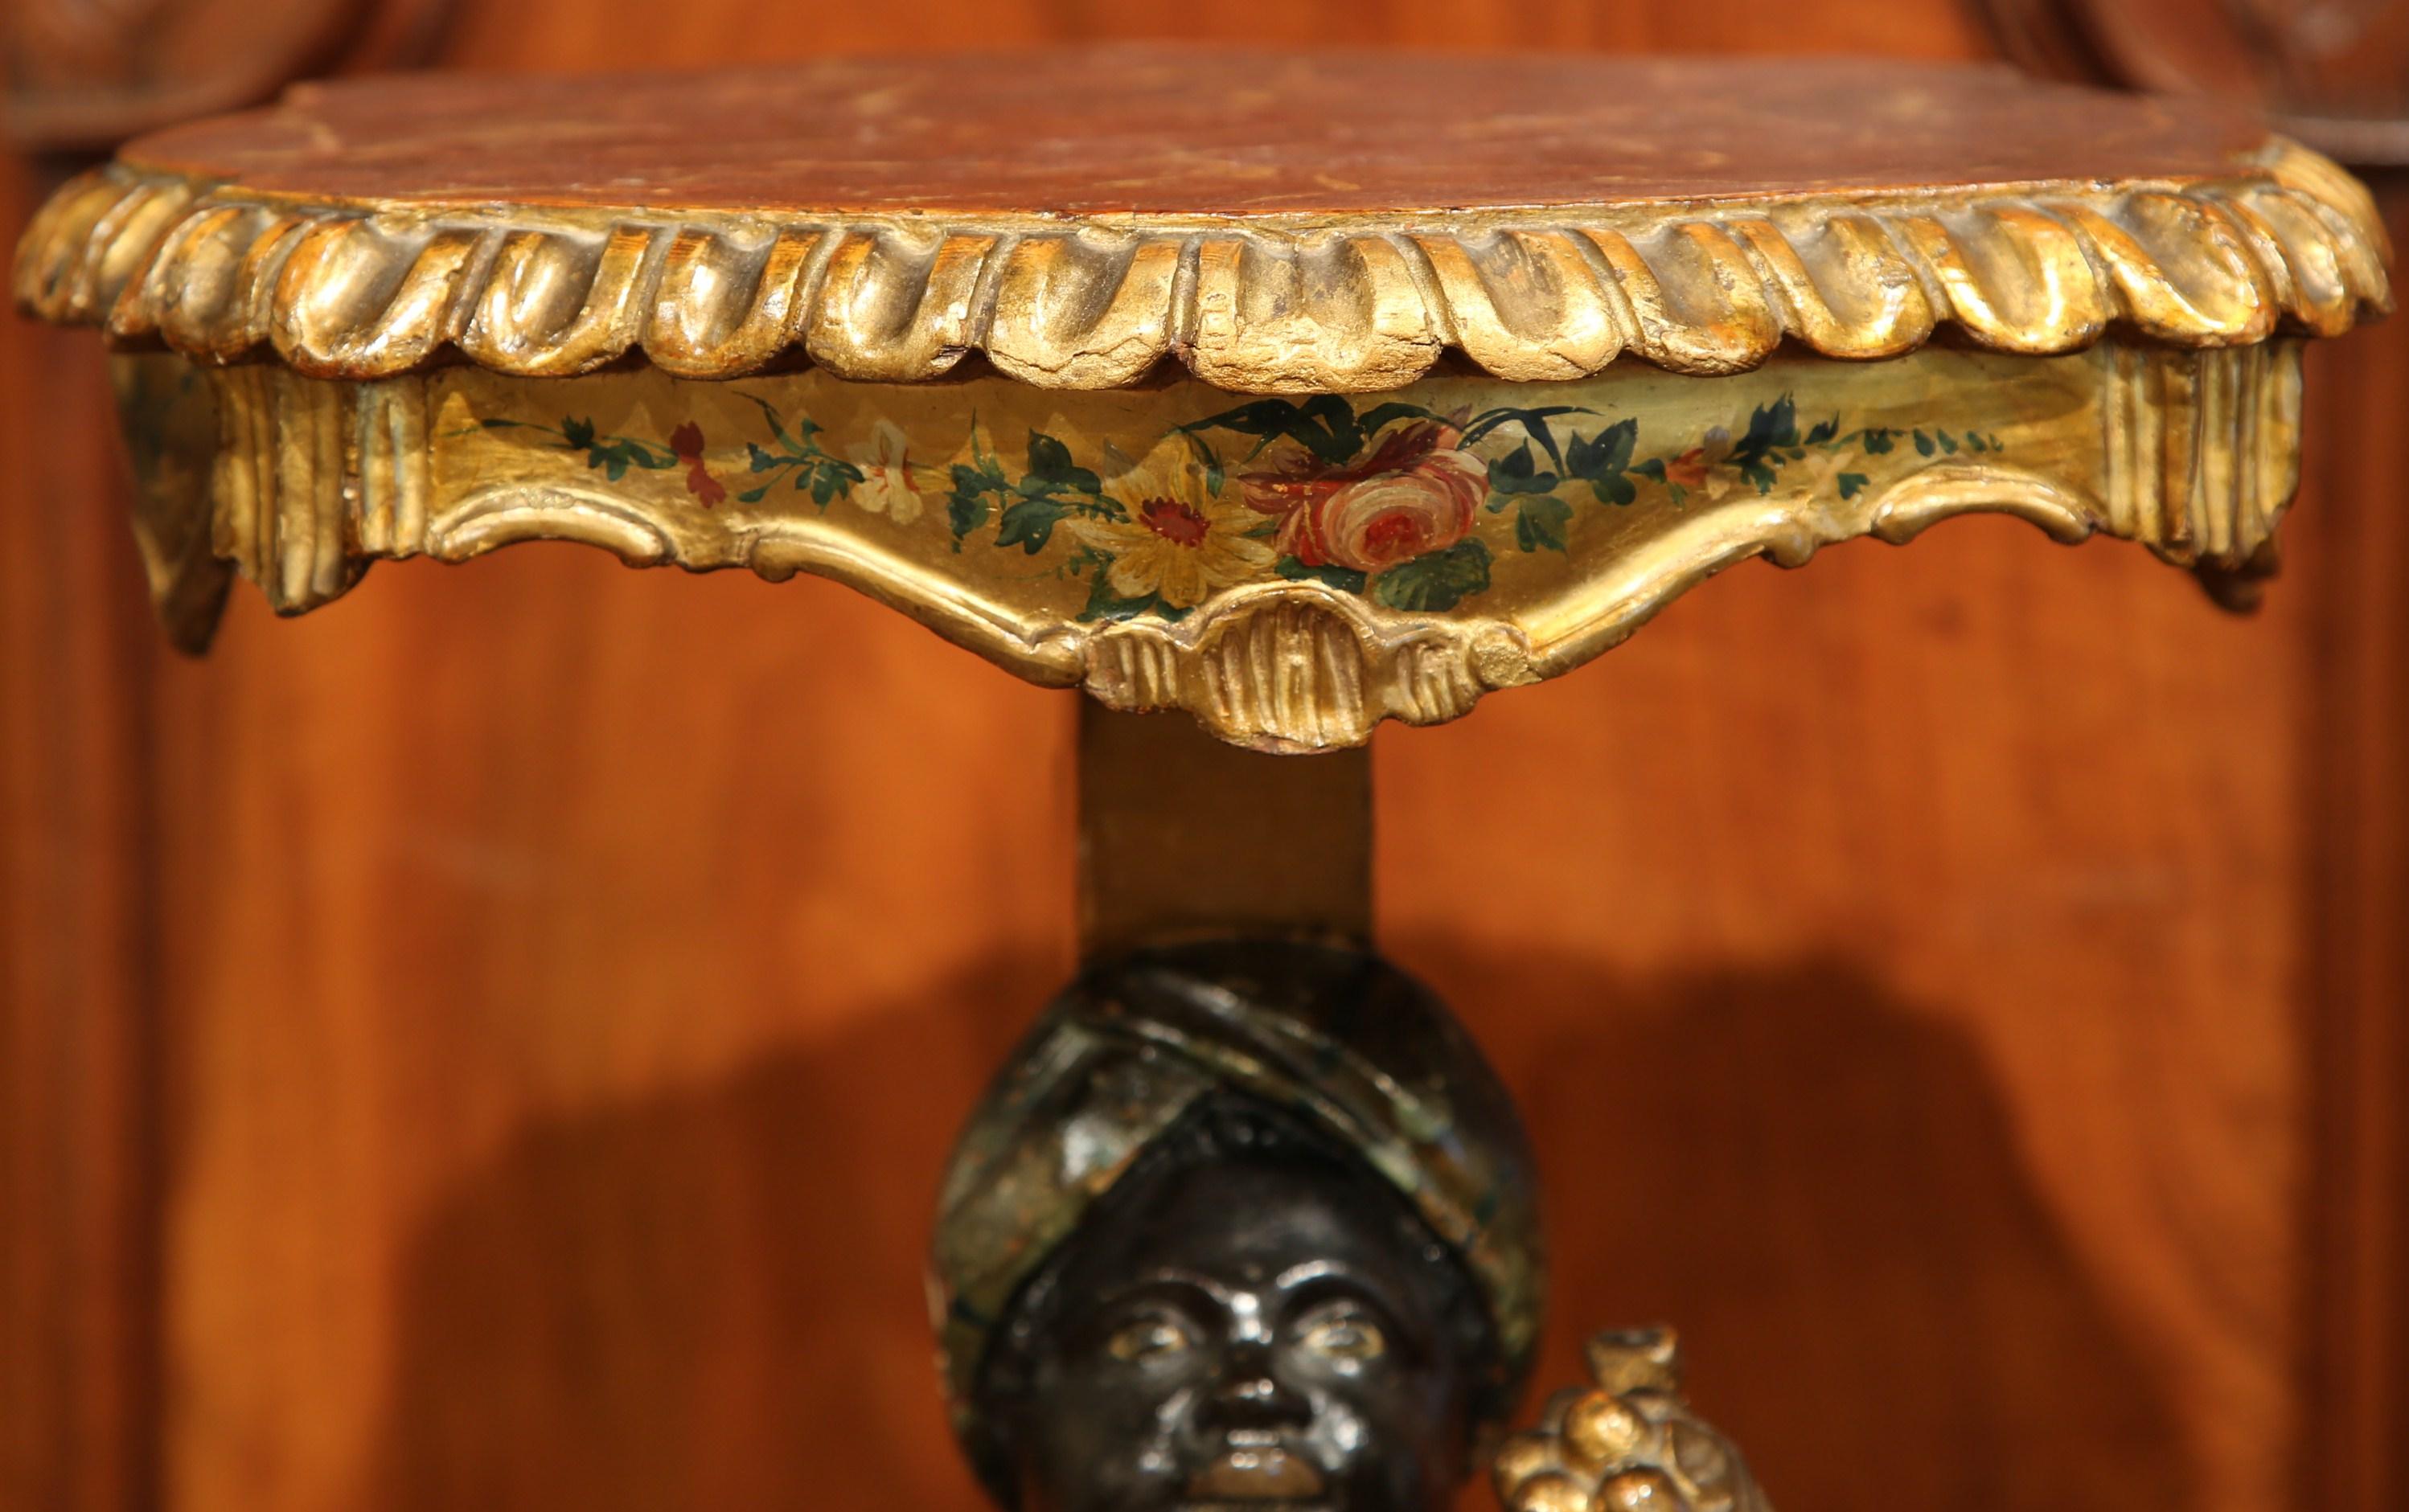 This intricate, antique hand-painted pedestal table was made in Italy, circa 1920. The colorful side table with carved and red painted marble top surface, sits on a three-leg foliage carved base decorated with painted flowers and luxurious gold leaf